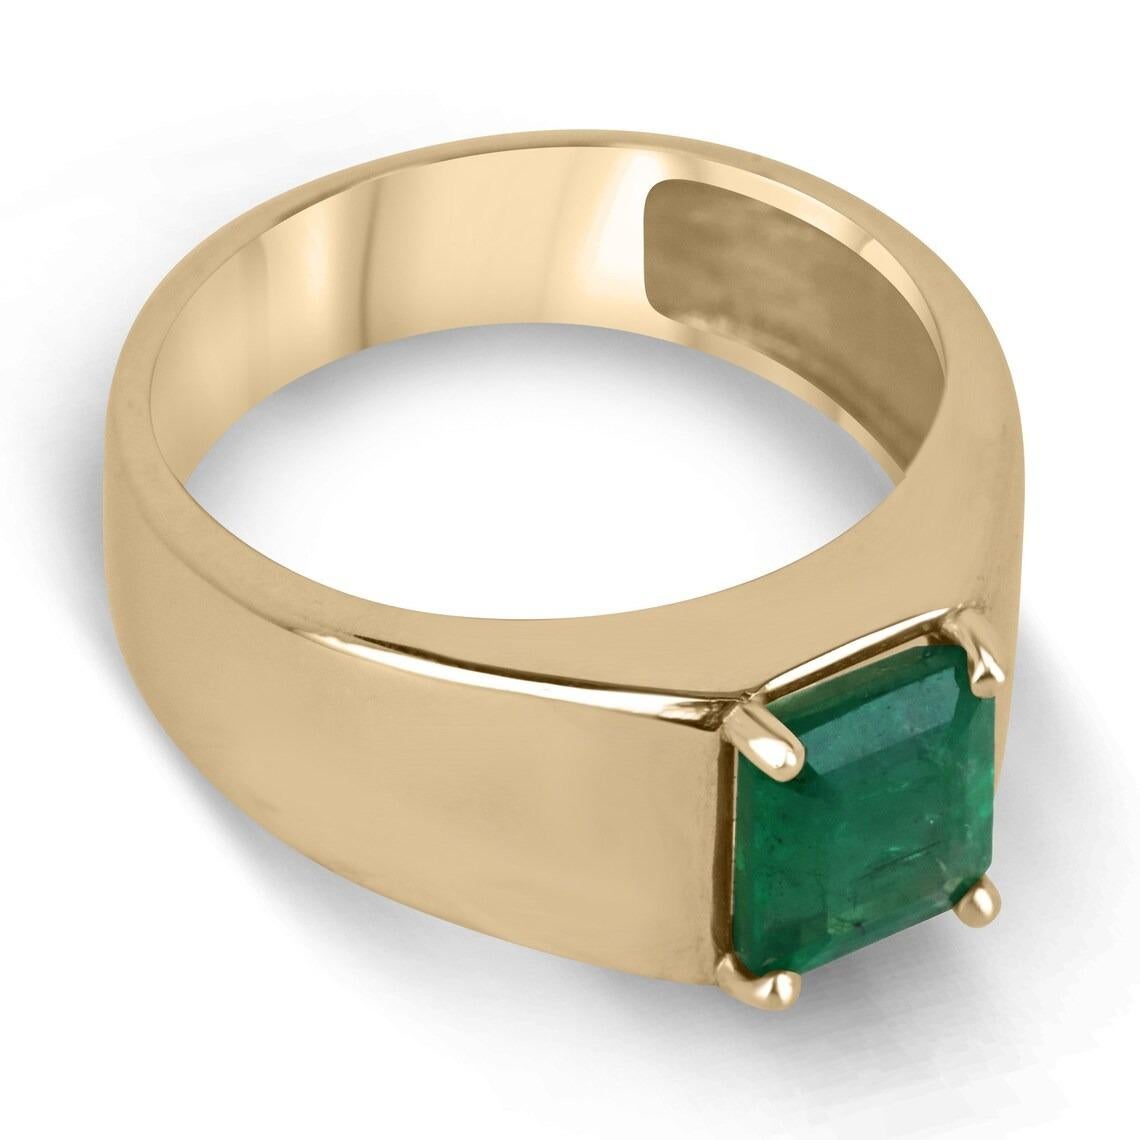 Displayed is a classic emerald solitaire emerald cut men's ring in 14K yellow gold. This solitaire ring carries a full 1.53-carat emerald in a secure prong setting. The emerald has very good clarity with minor flaws that are normal in all genuine